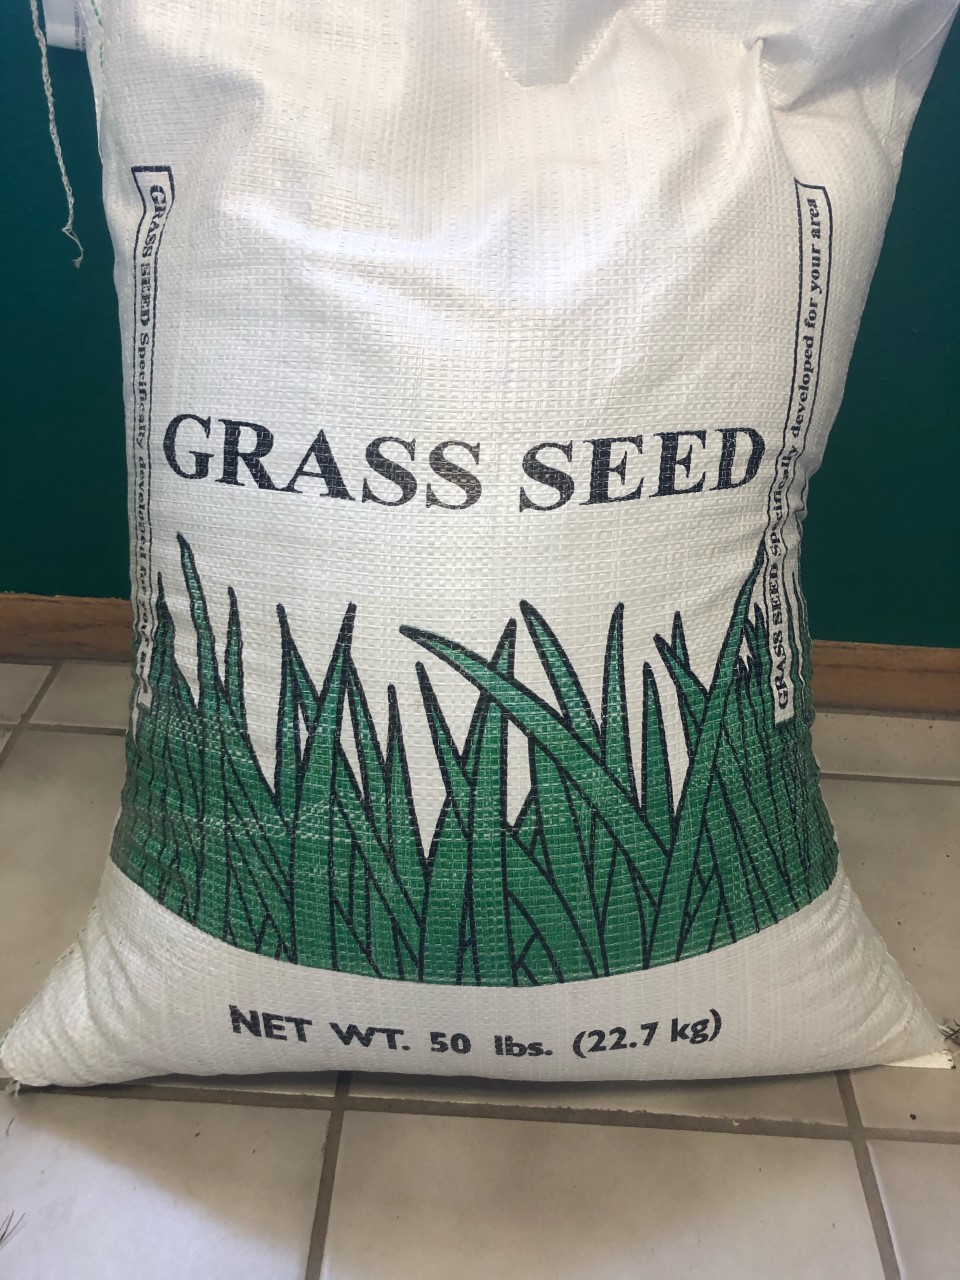 Discover 65+ bags grass seed best in.duhocakina